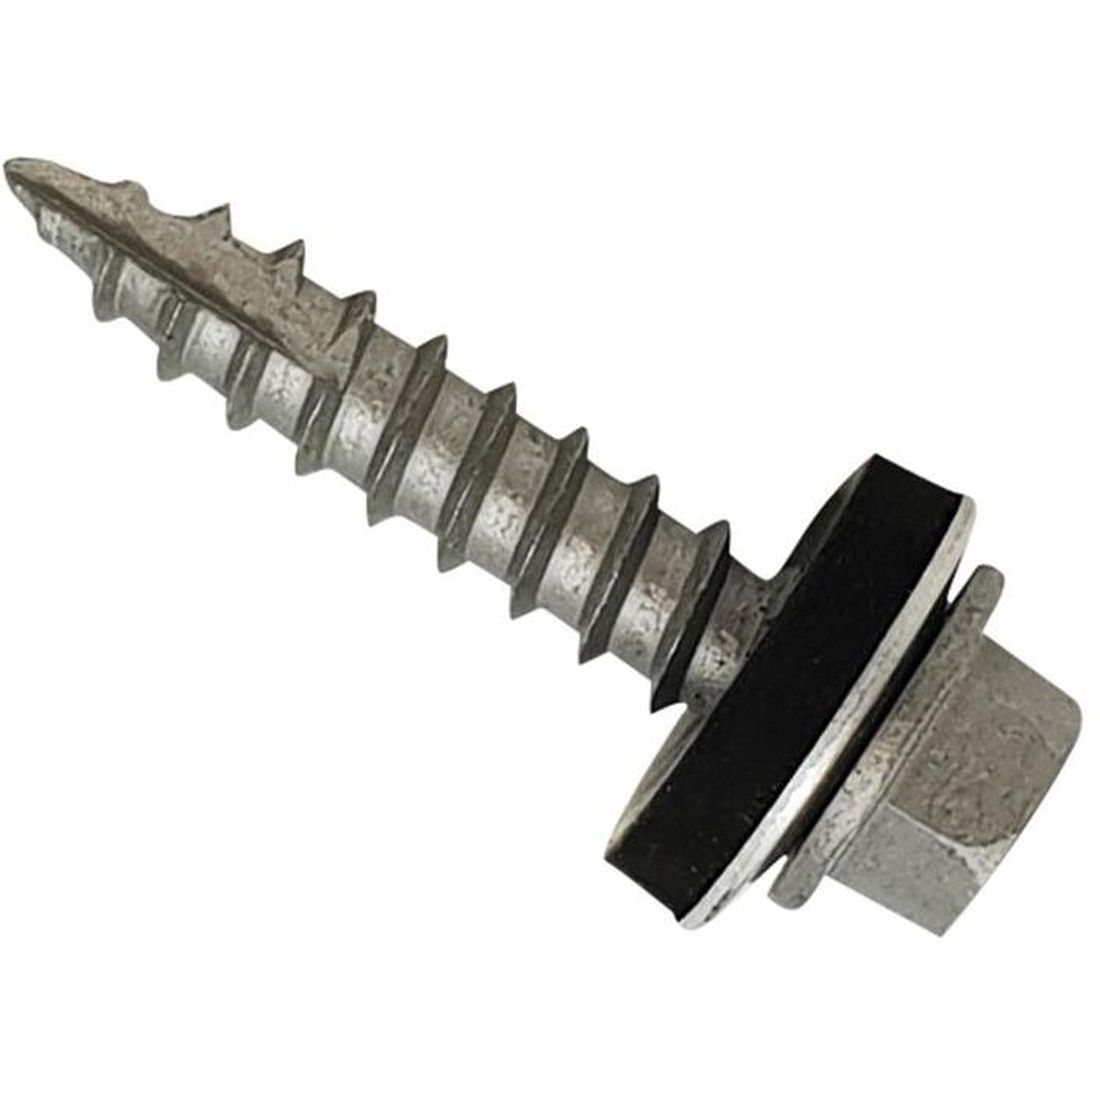 ForgeFix TechFast Metal Roofing to Timber Hex Screw T17 Gash Point 6.3 x 100mm Box 100   